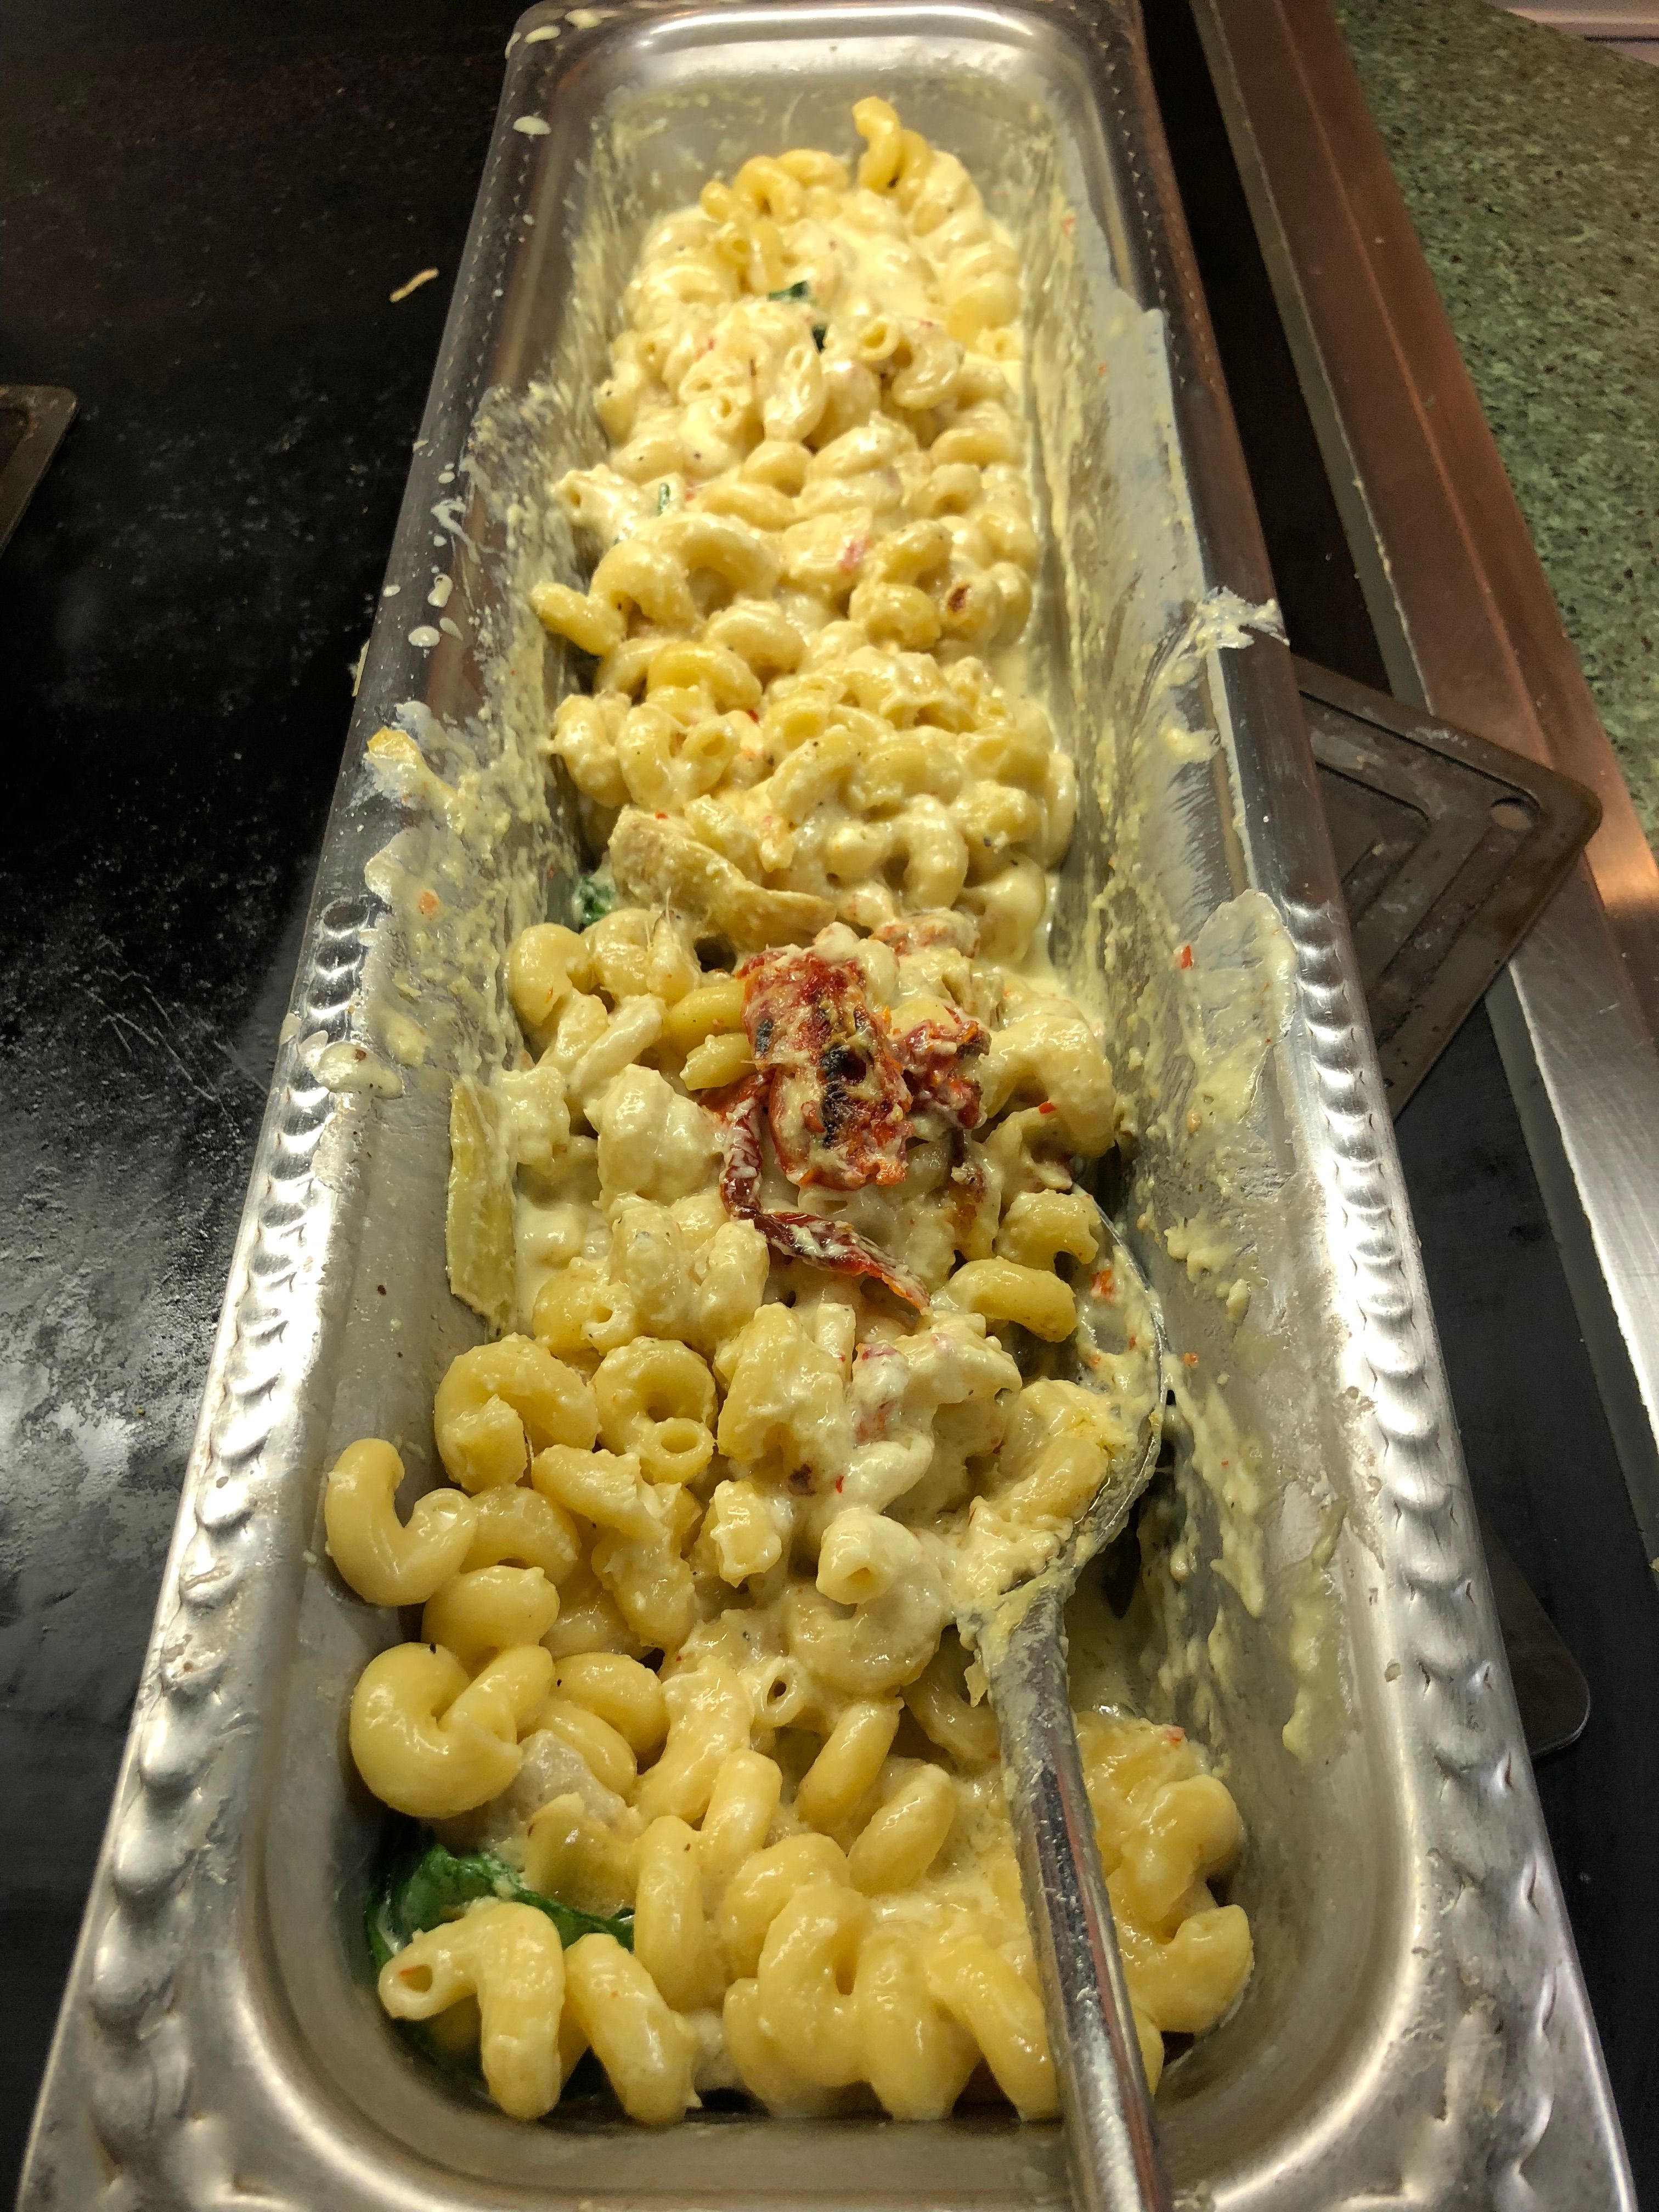 Macoroni and cheese Lunch Buffet in Walt Disney World at Crystal Palace!.jpg